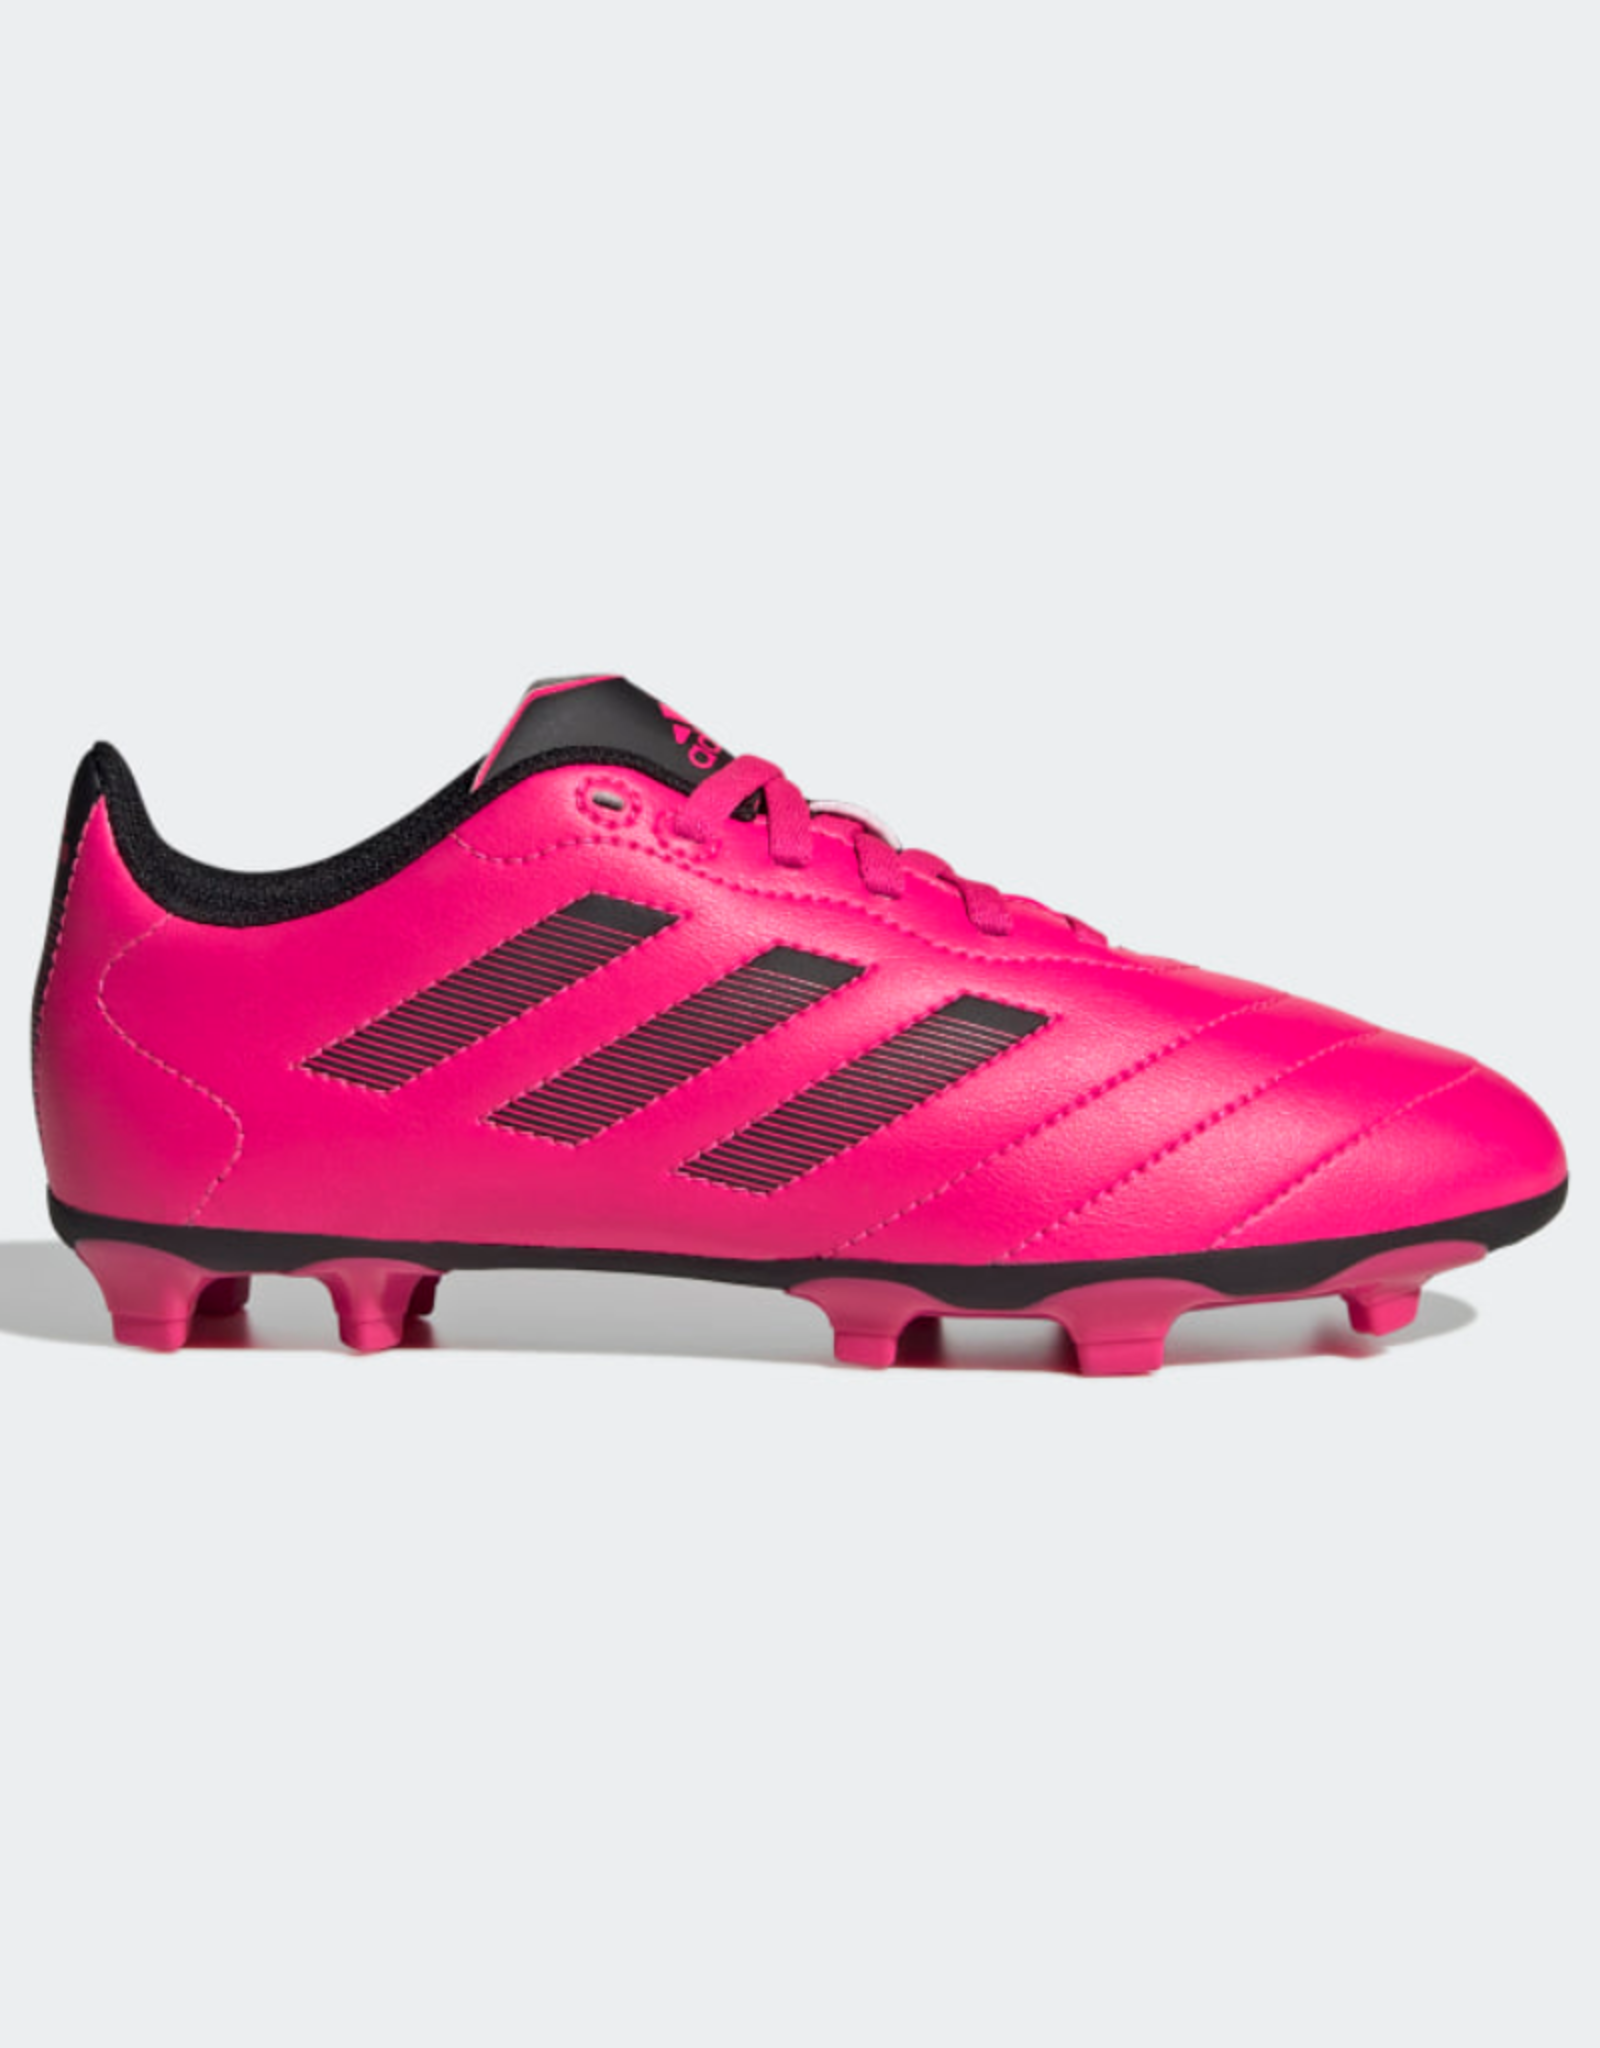 Adidas Adidas Goletto VIII Soccer Cleats Pink